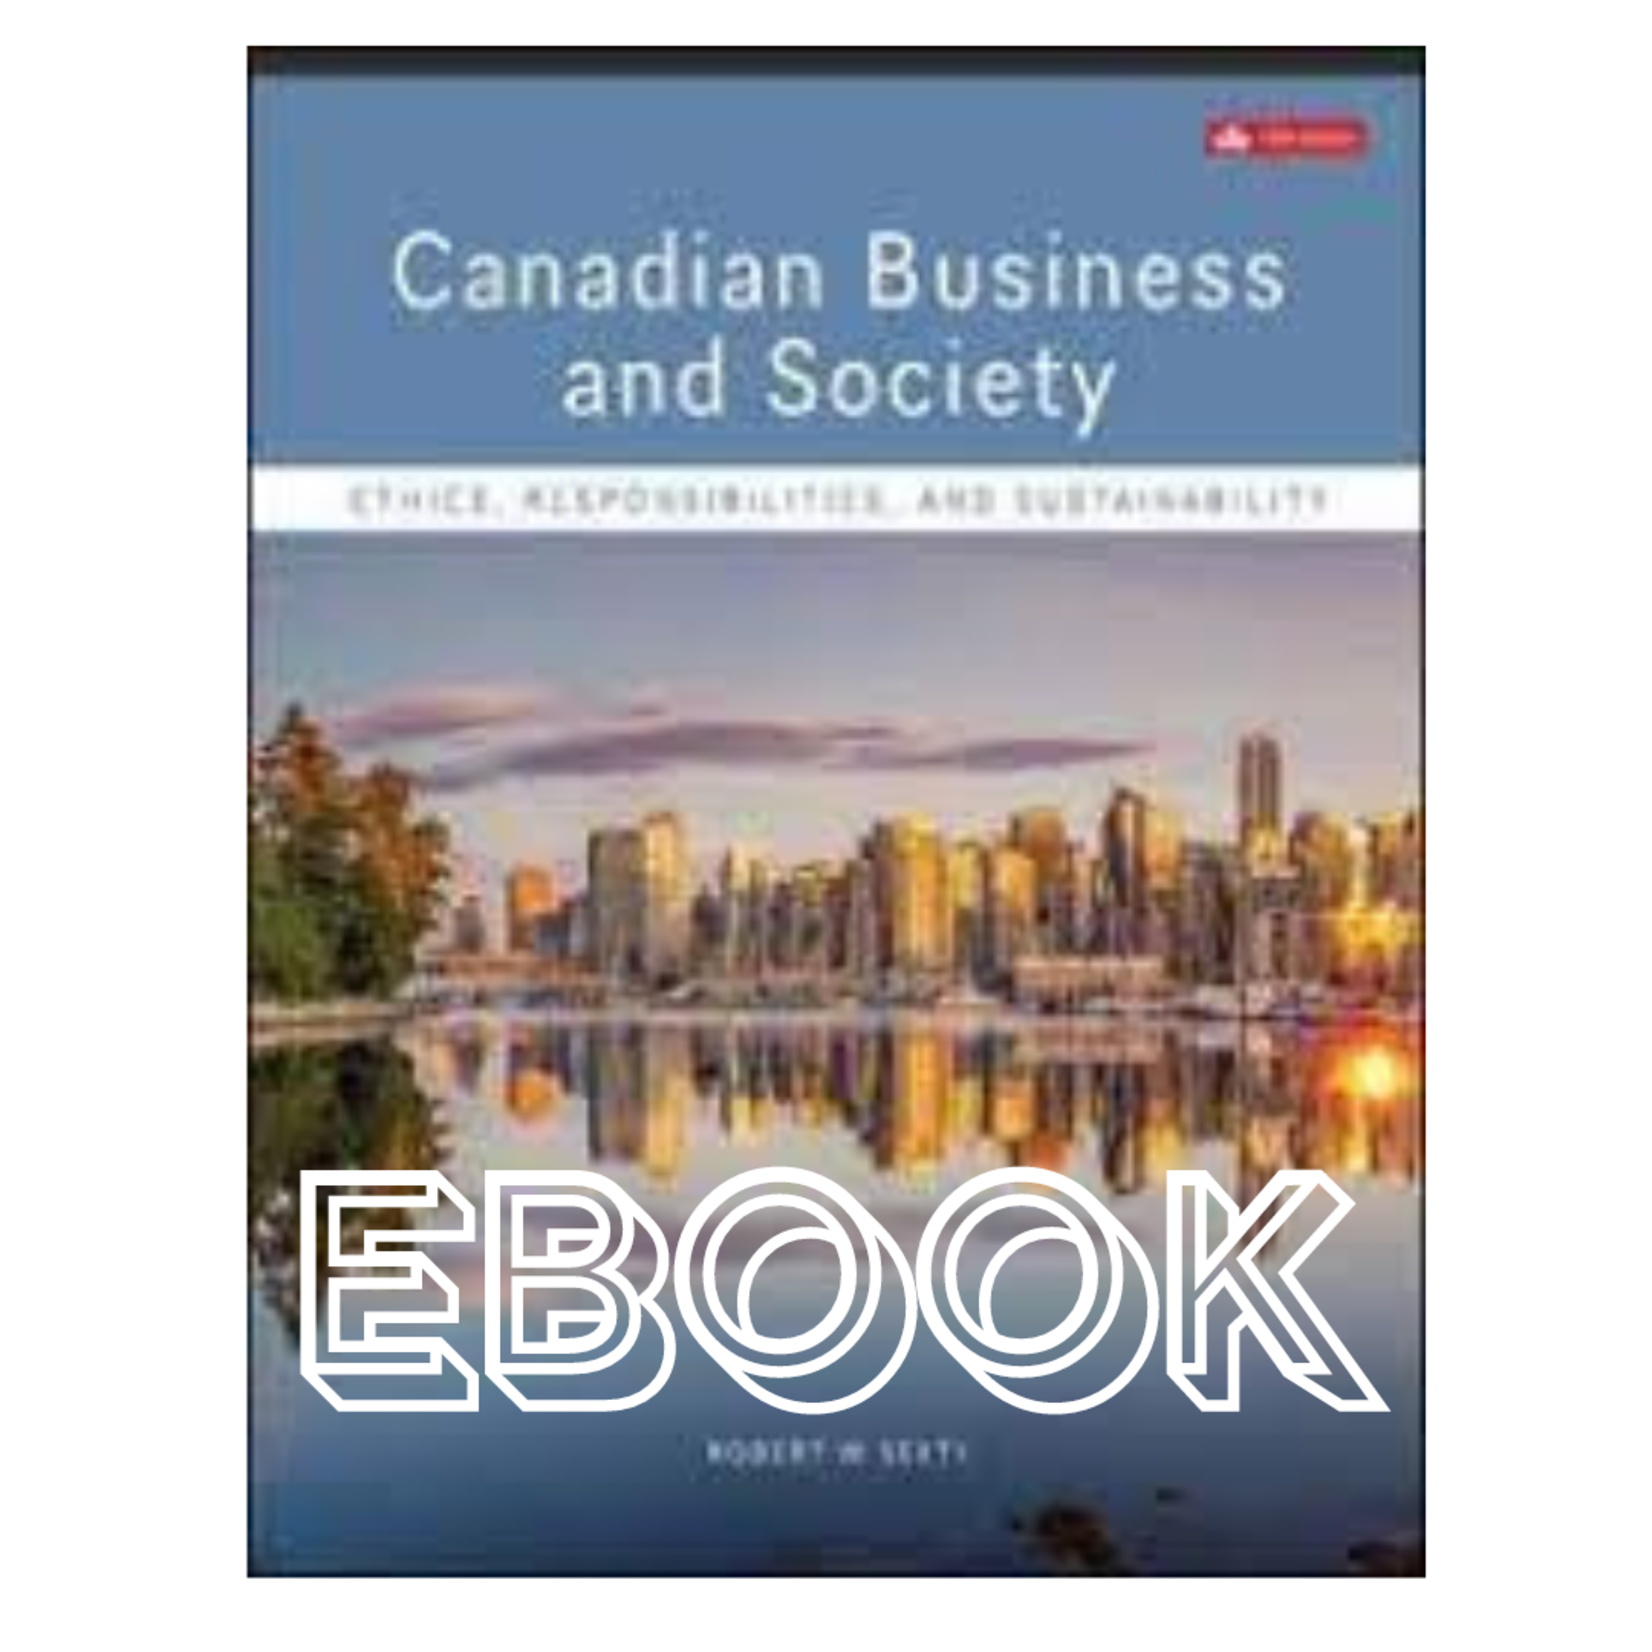 McGraw-Hill Canadian Business and Society EBOOK